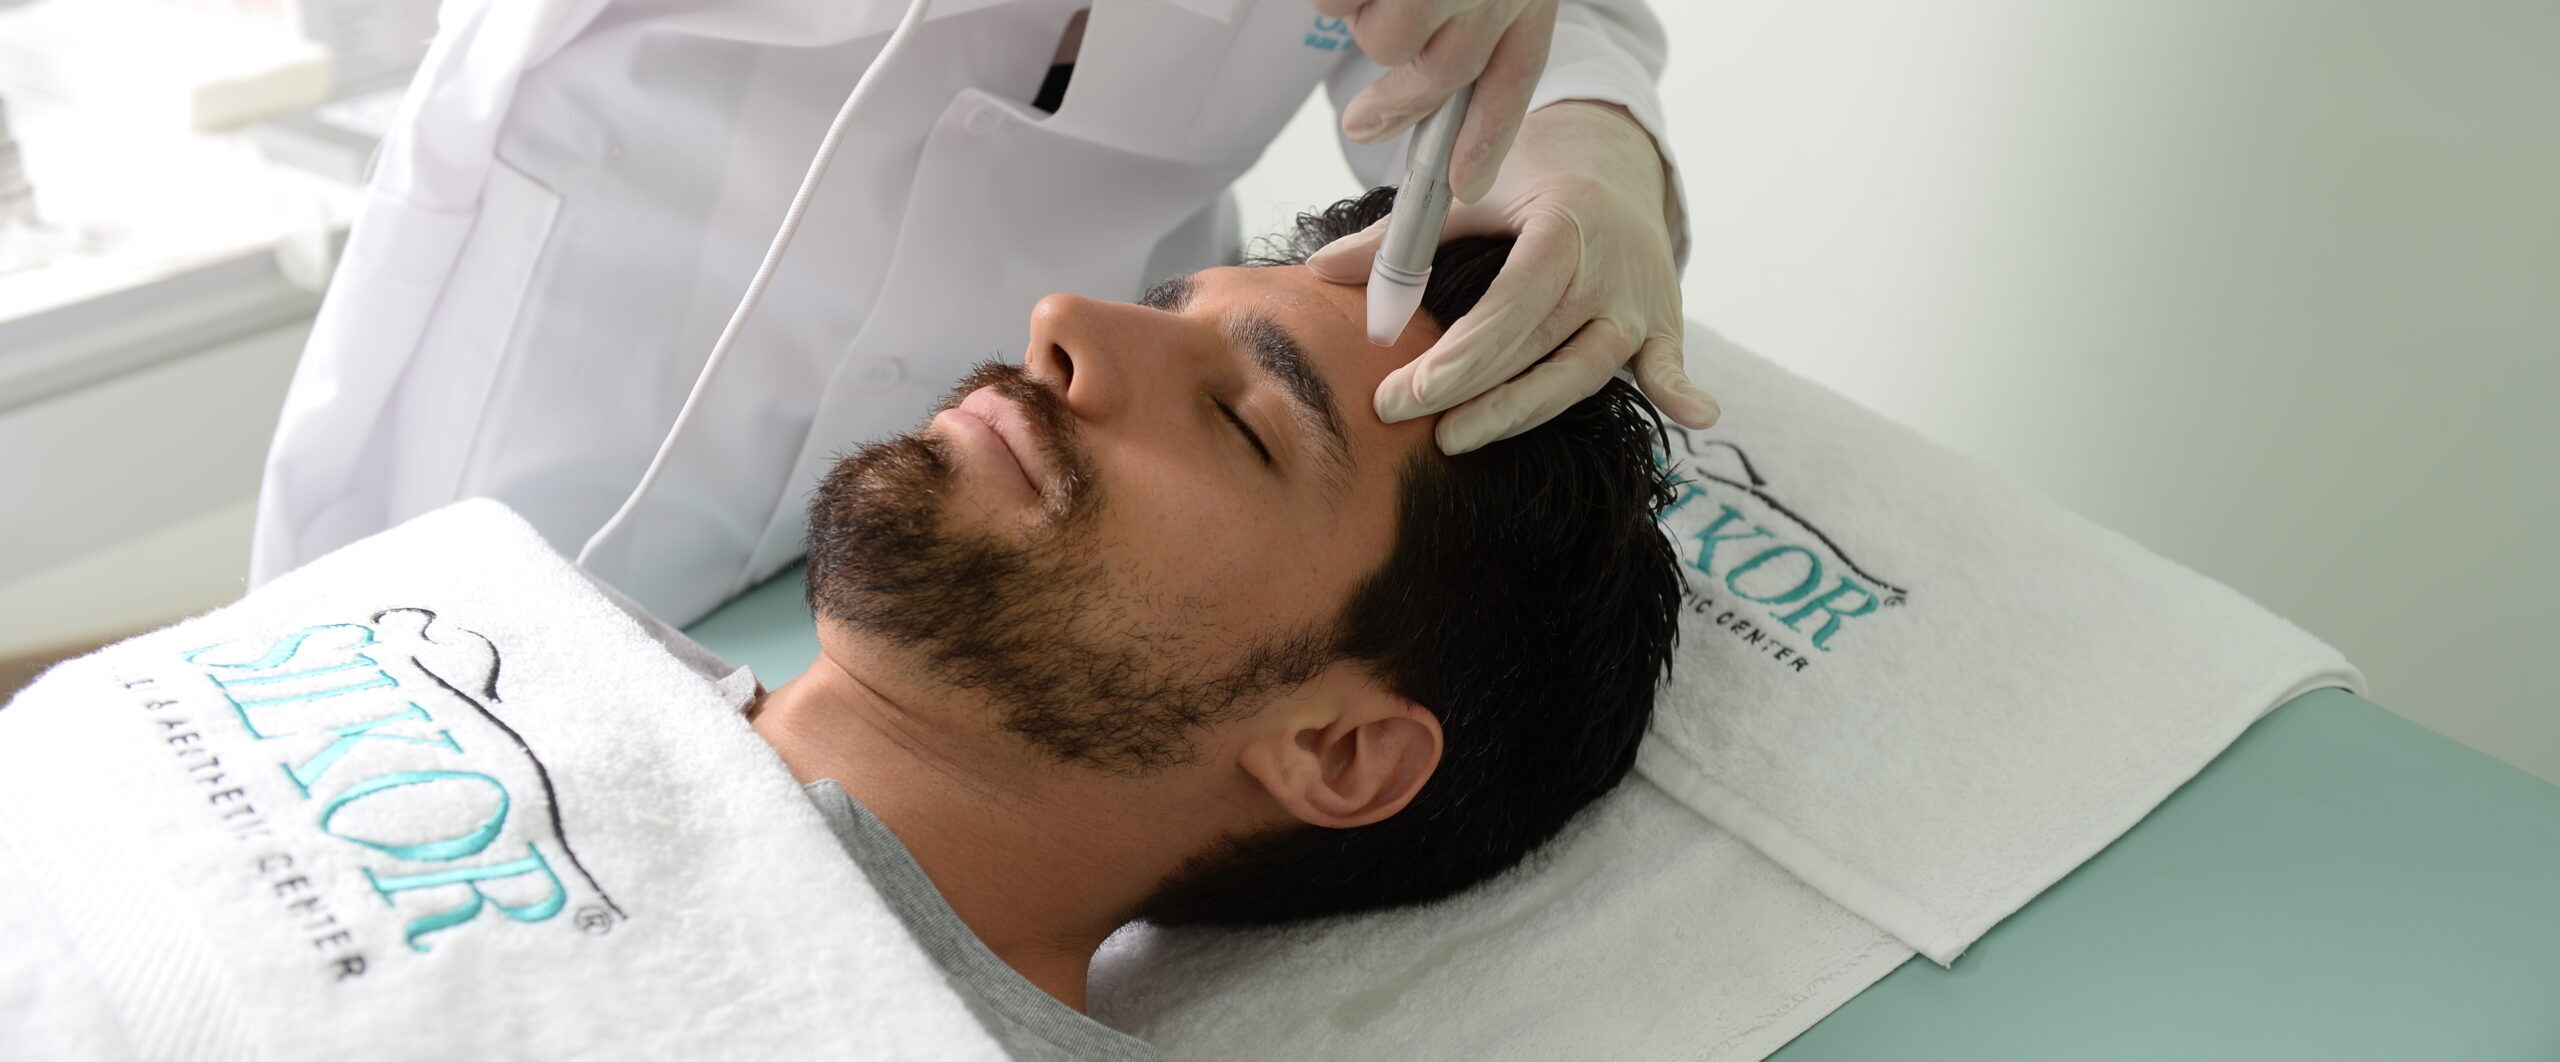 Mesotherapy Treatment